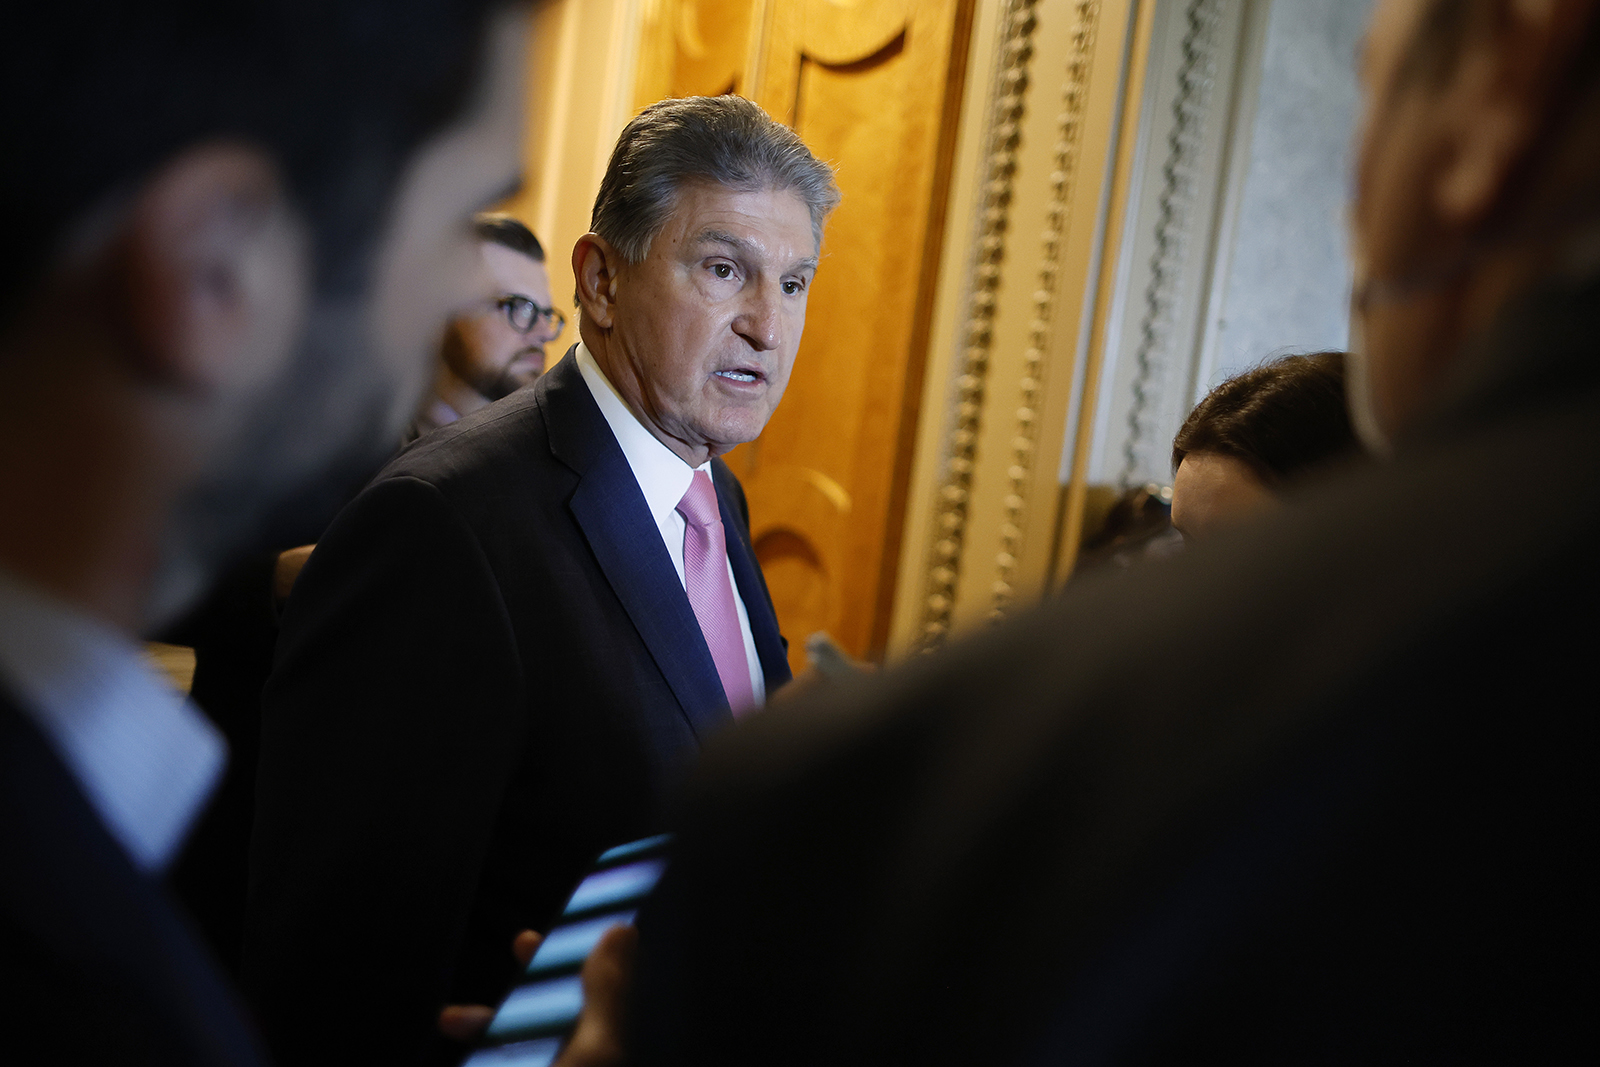 Sen. Joe Manchin (D-WV) talks to reporters before heading into the Senate Chamber for a vote at the U.S. Capitol on May 10 in Washington, DC.